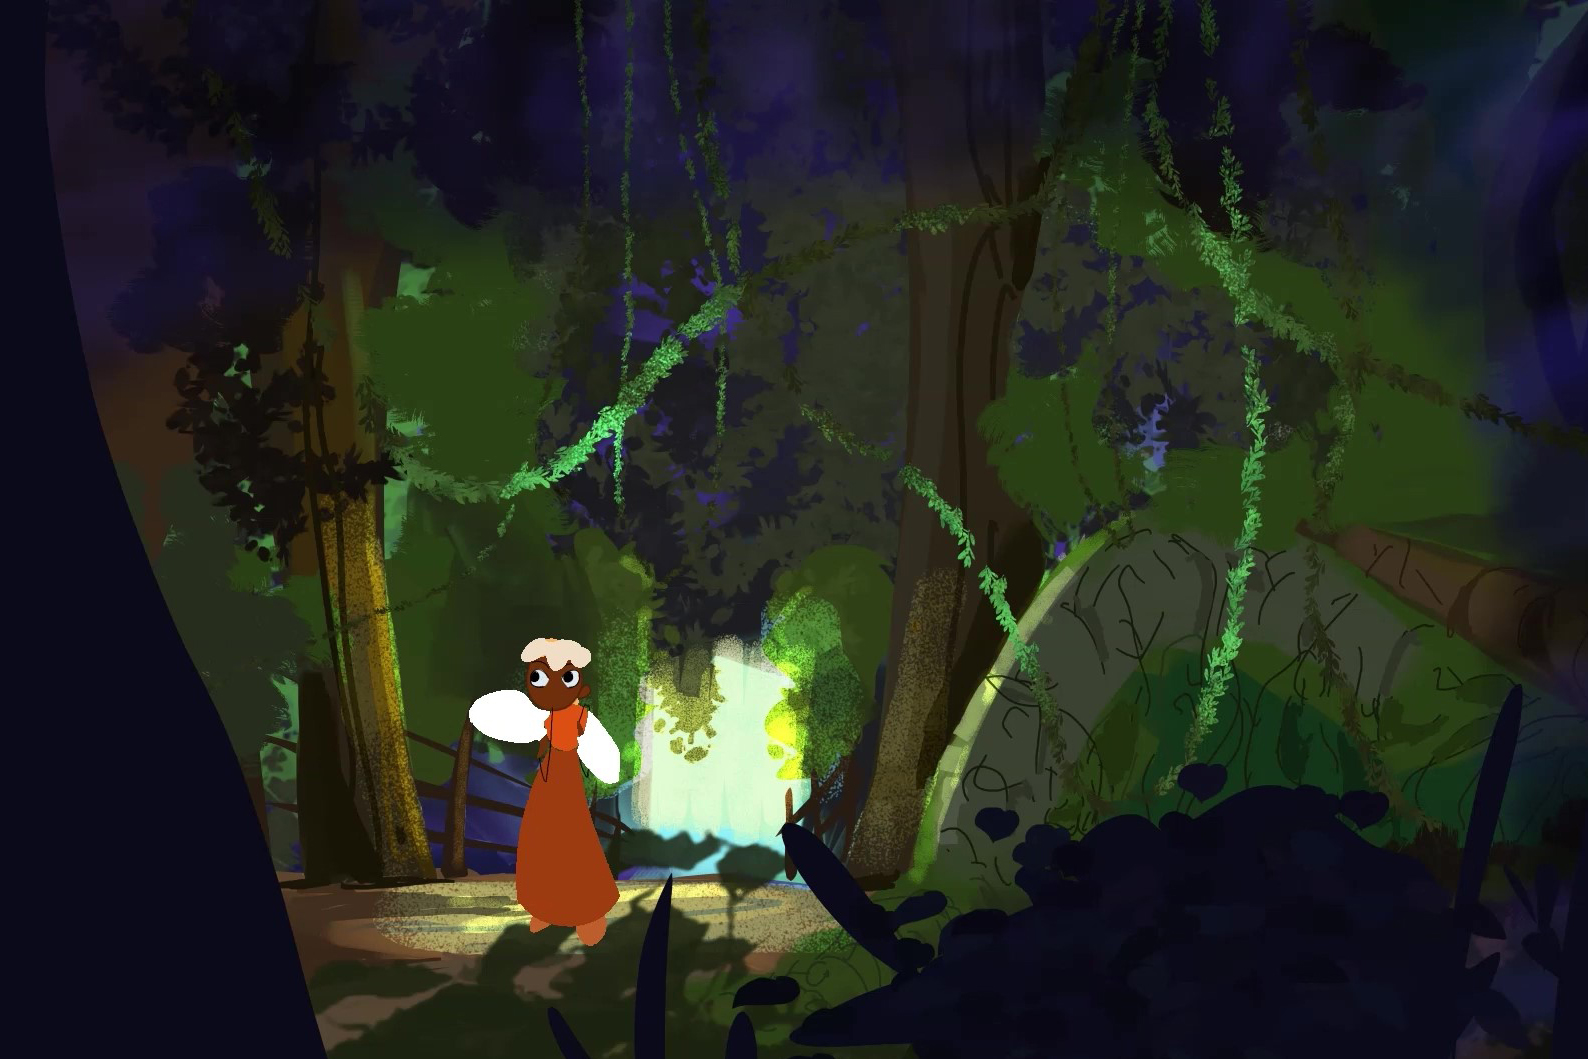 A 2D-animated character walks in a forest.